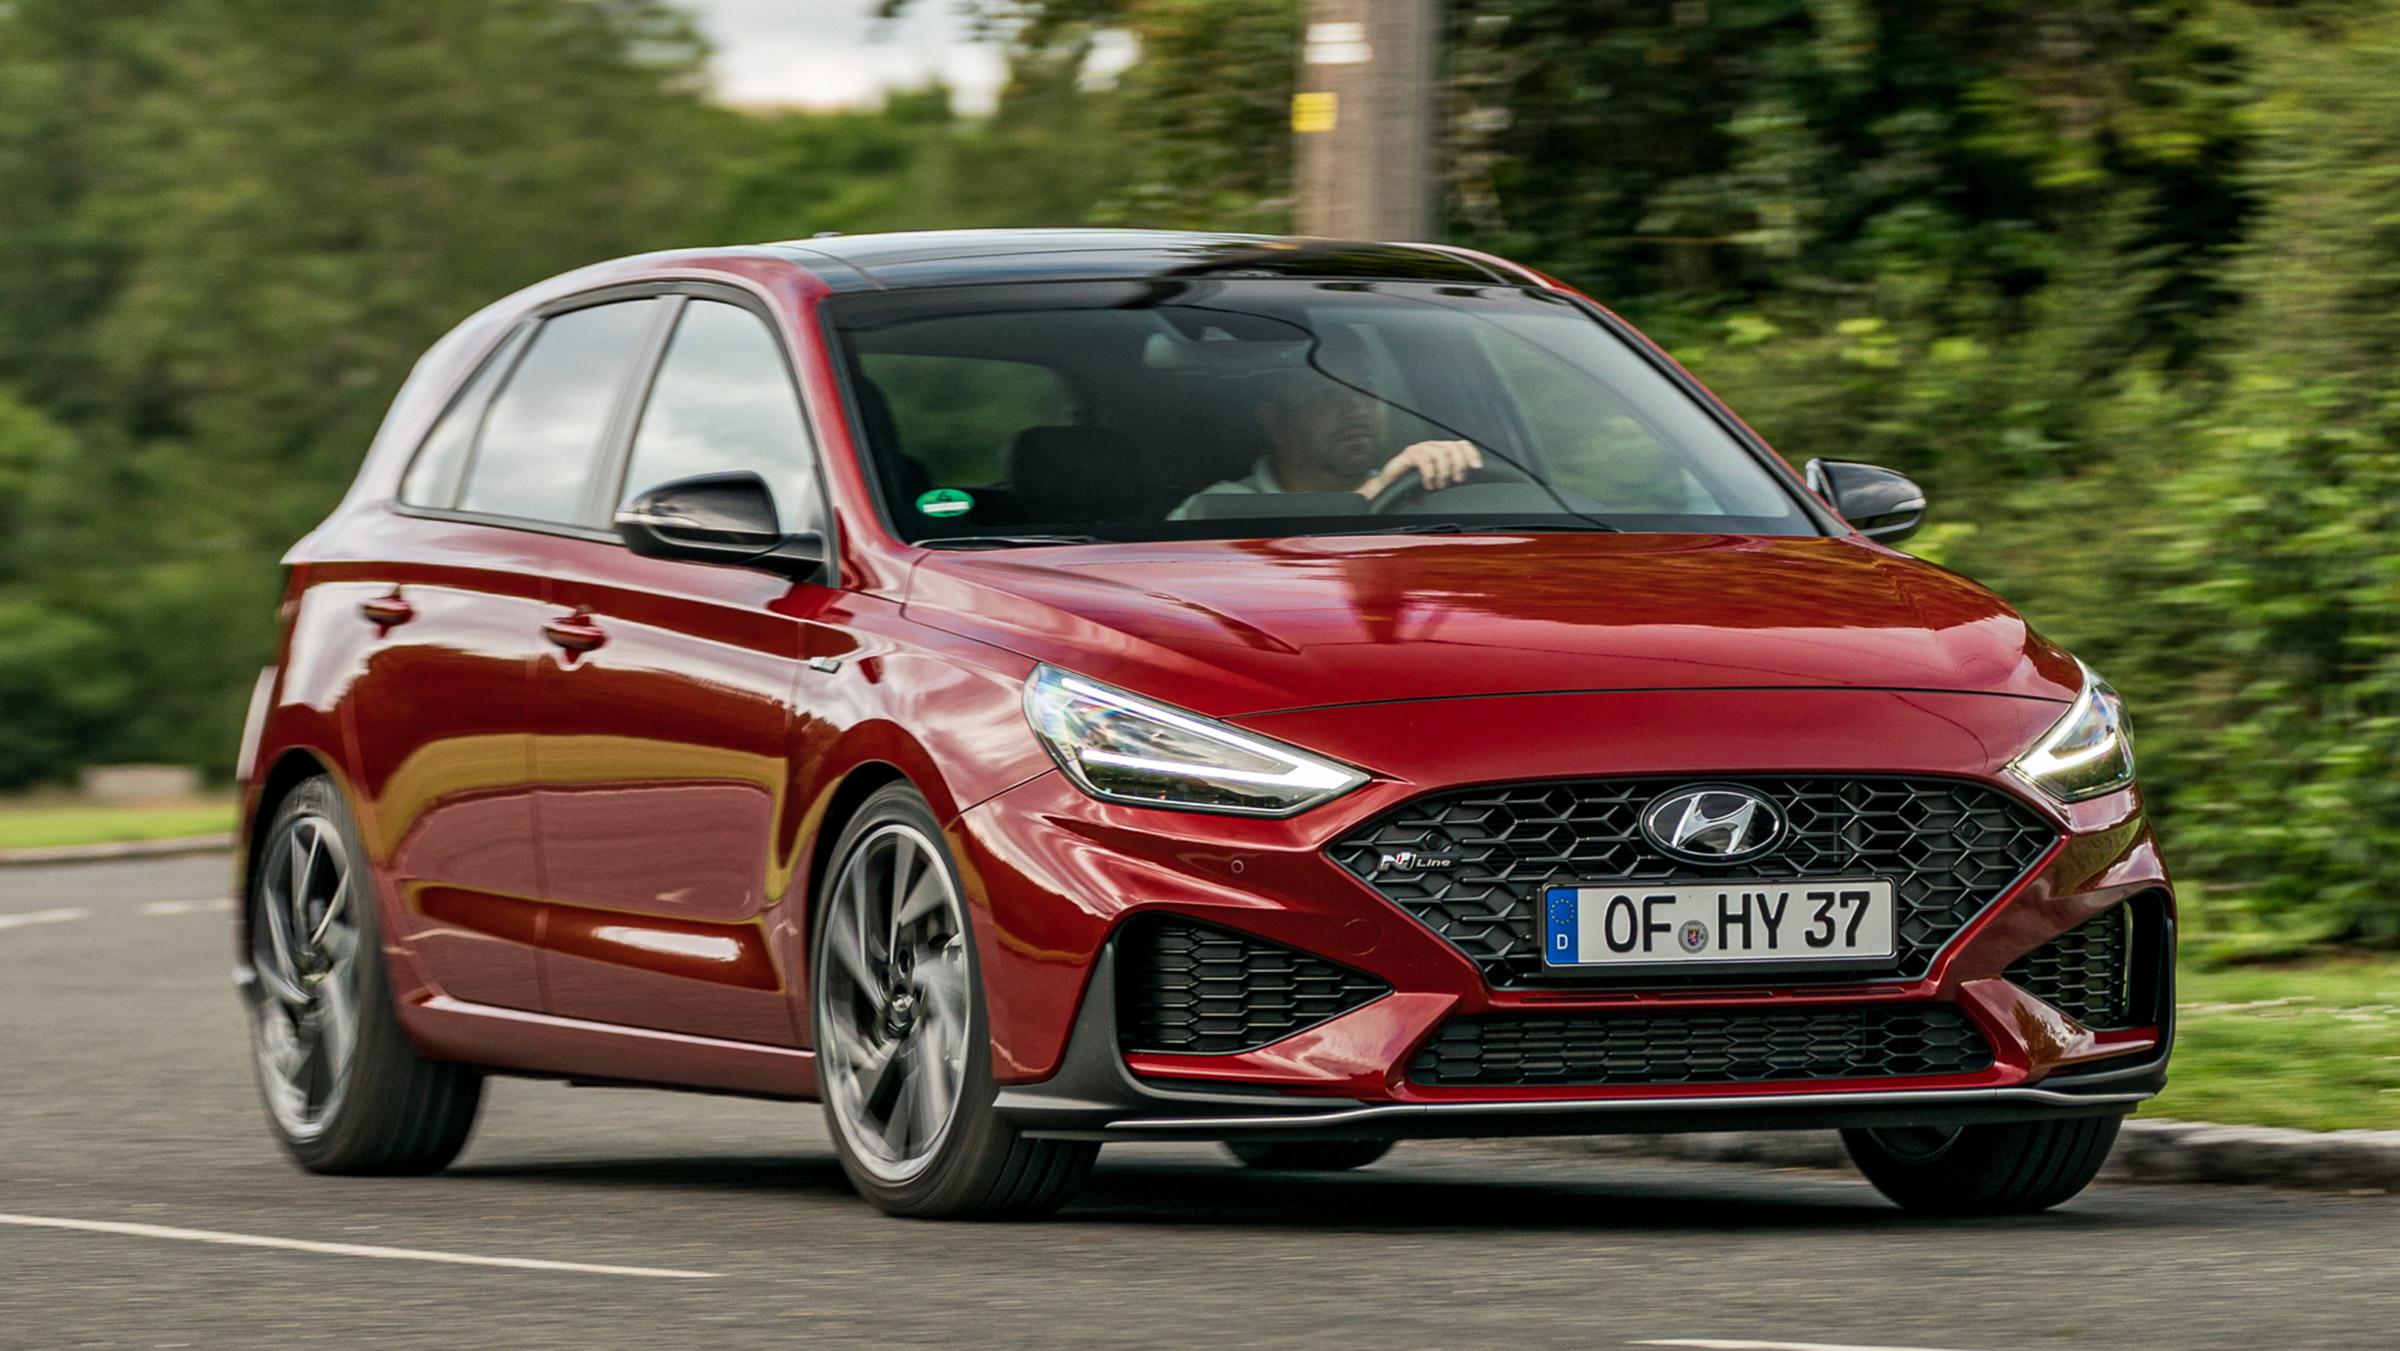 2020 Hyundai i30 facelift starts from £20,695 Carbuyer